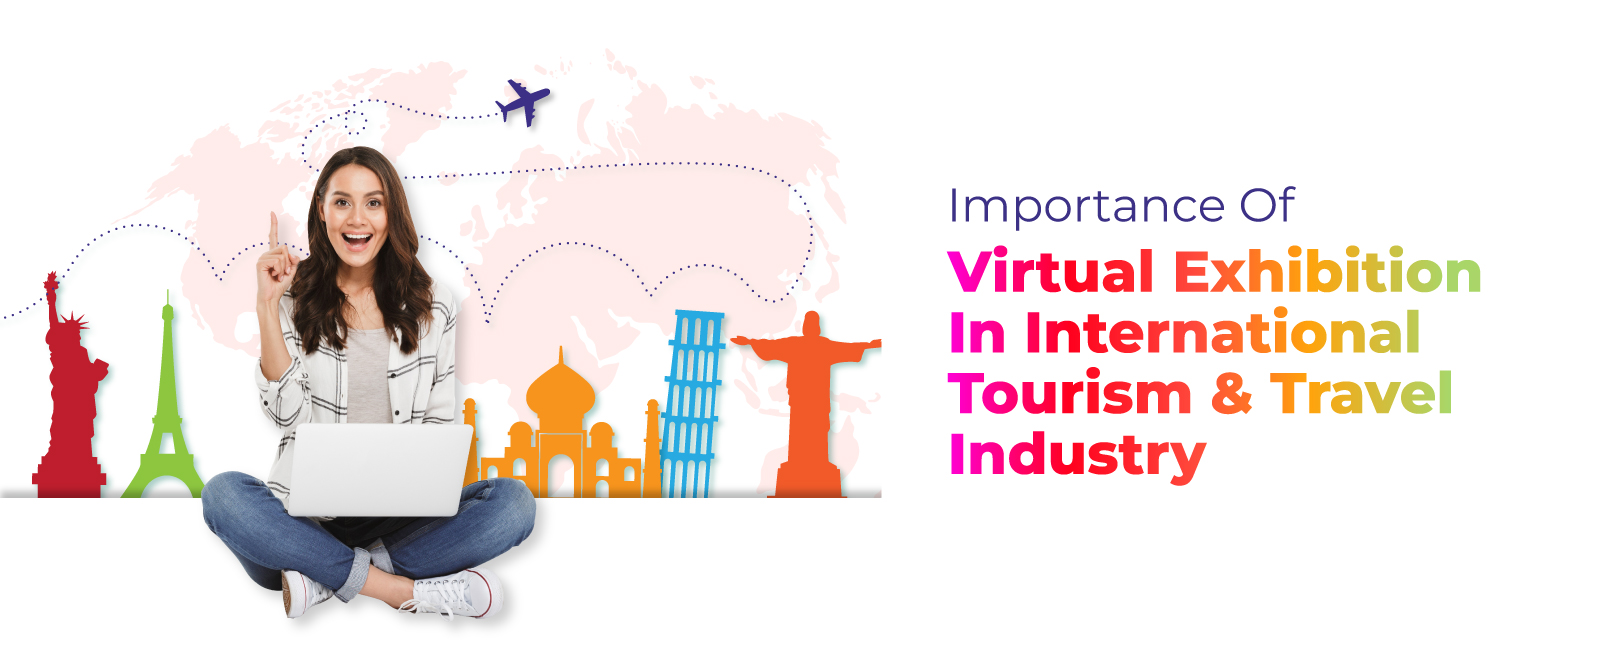 Importance of Virtual Exhibition in International Tourism & Travel Industry